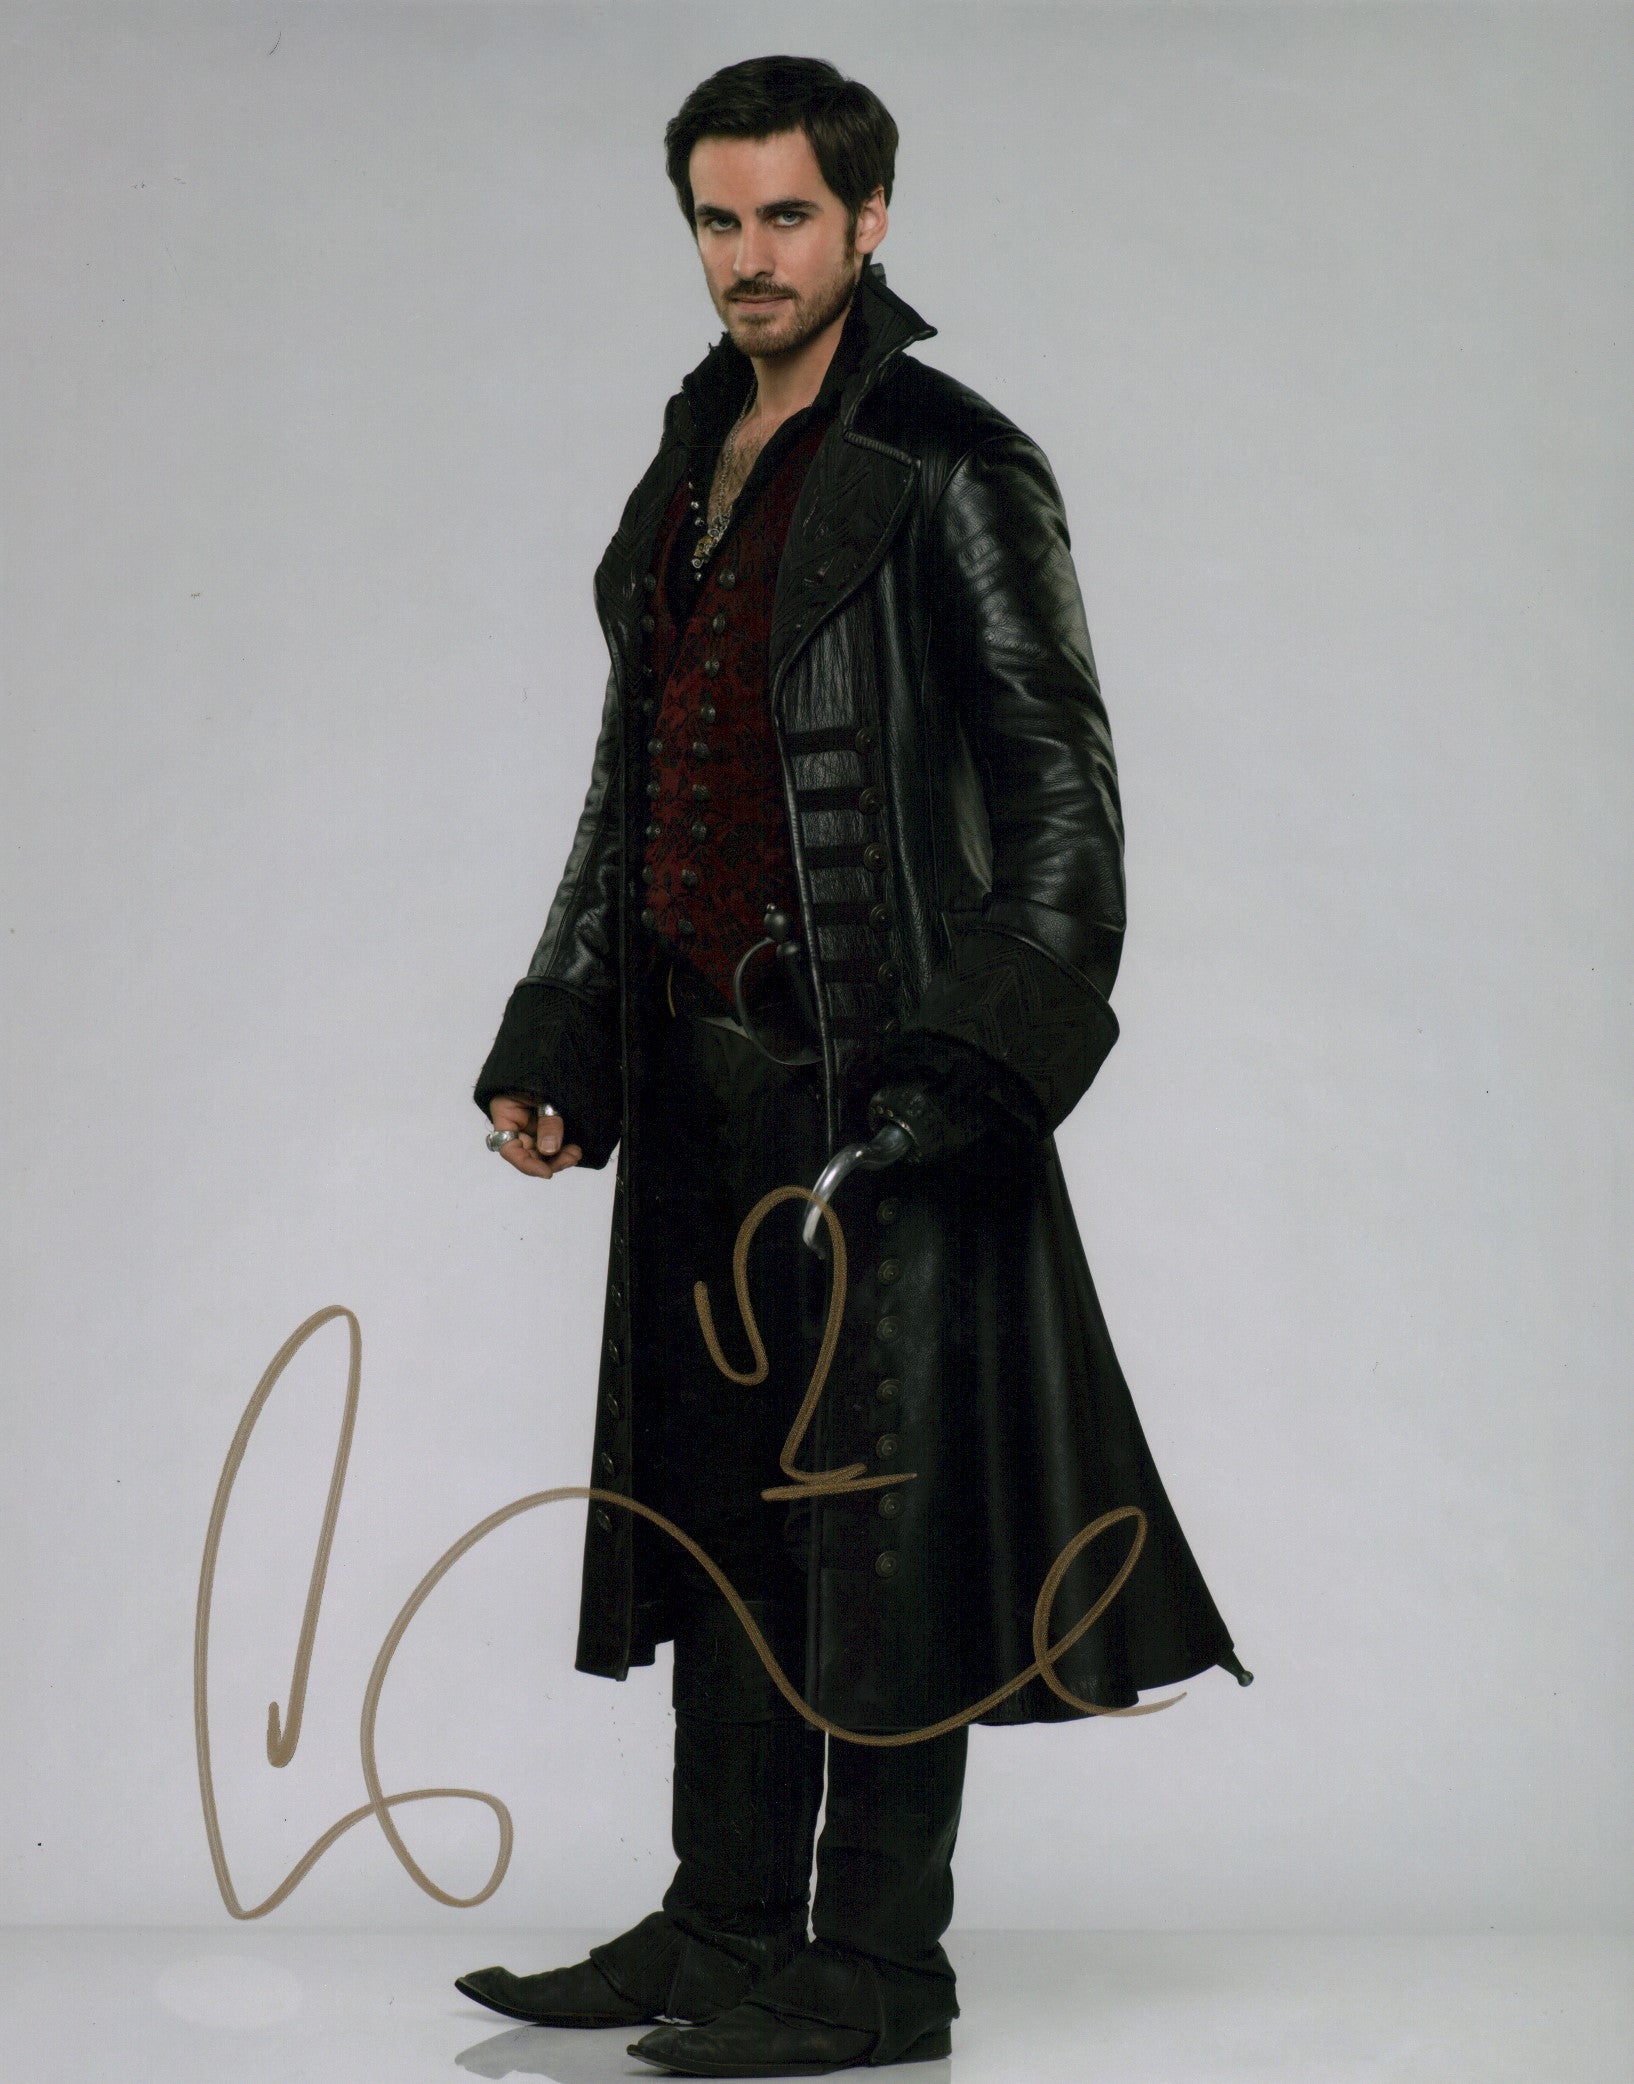 Colin O'Donoghue Once Upon A Time 11x14 Signed Photo Poster JSA Certified Autograph